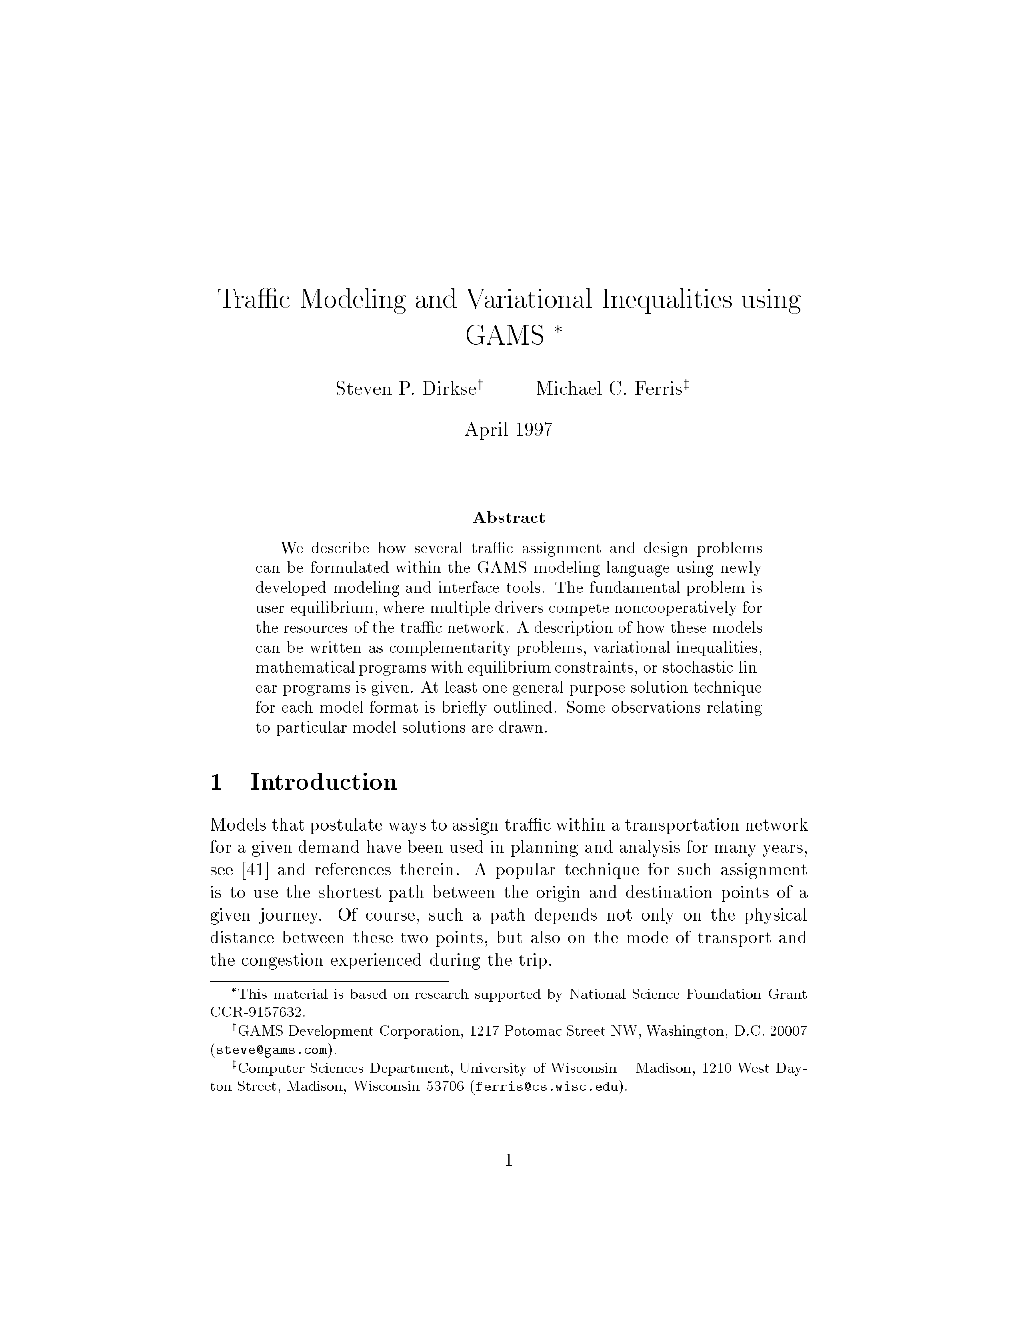 Tra C Modeling and Variational Inequalities Using GAMS